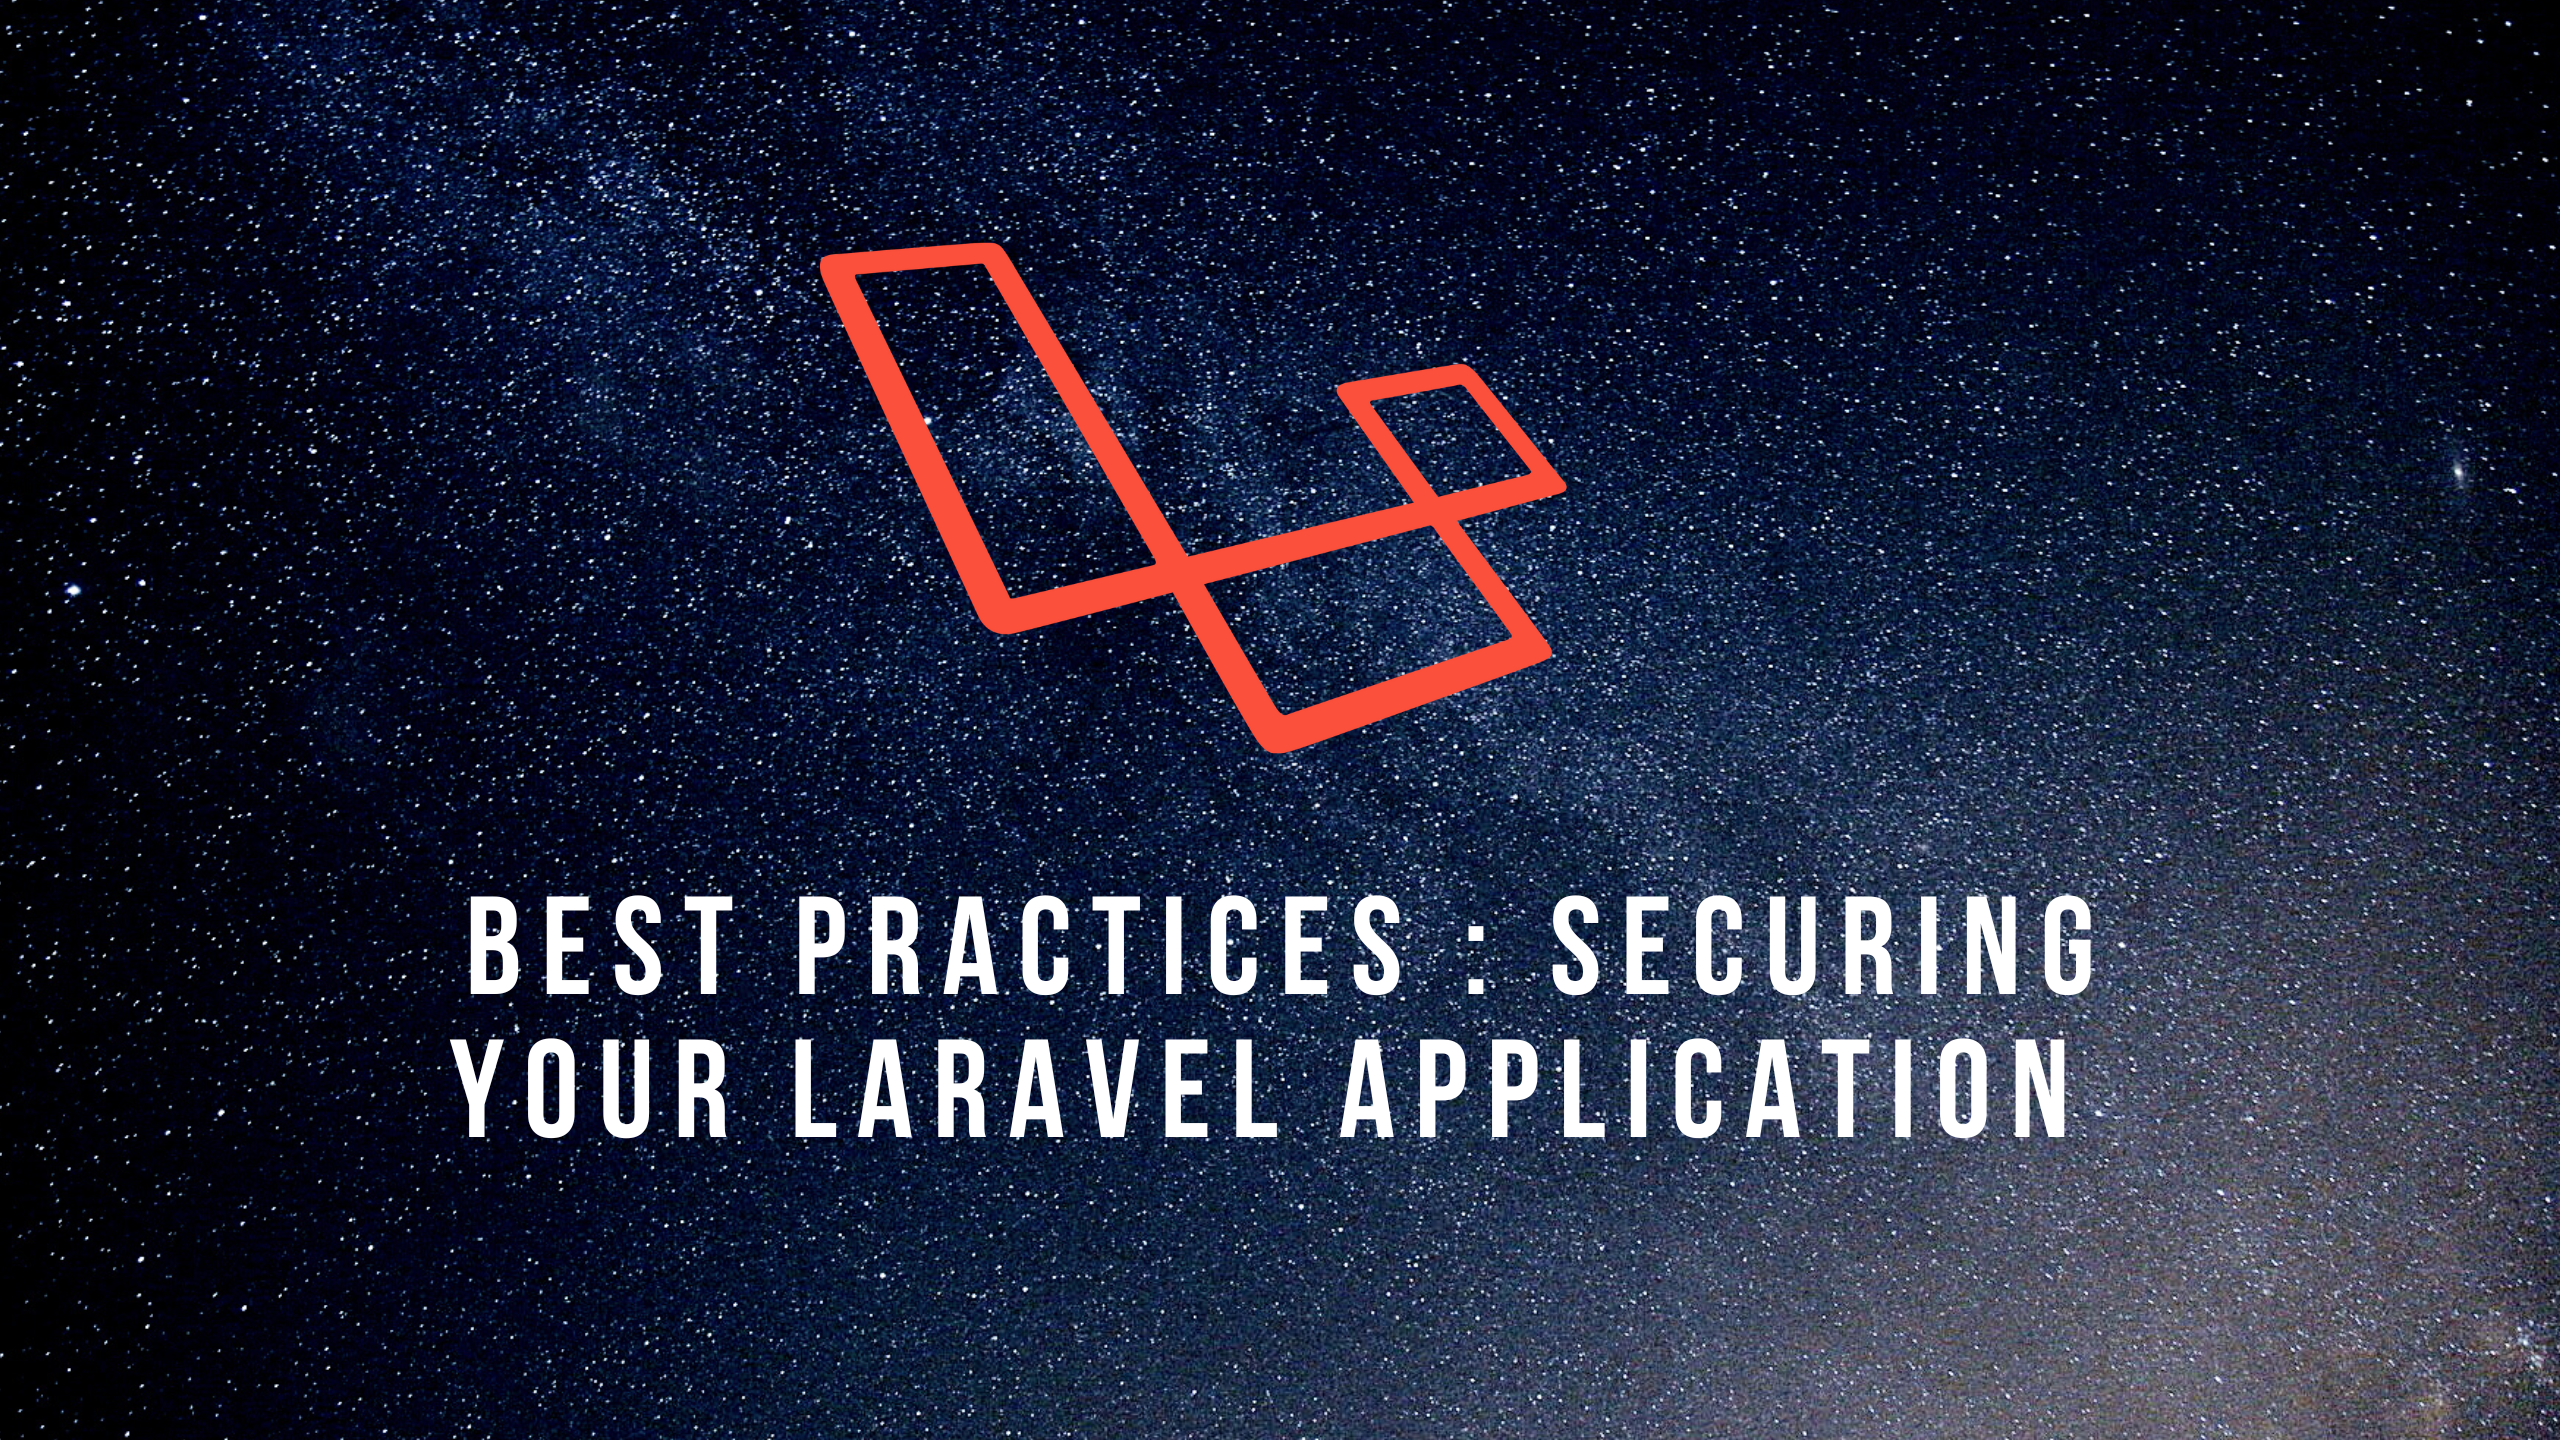 Securing Your Laravel Application: Best Practices and Common Pitfalls